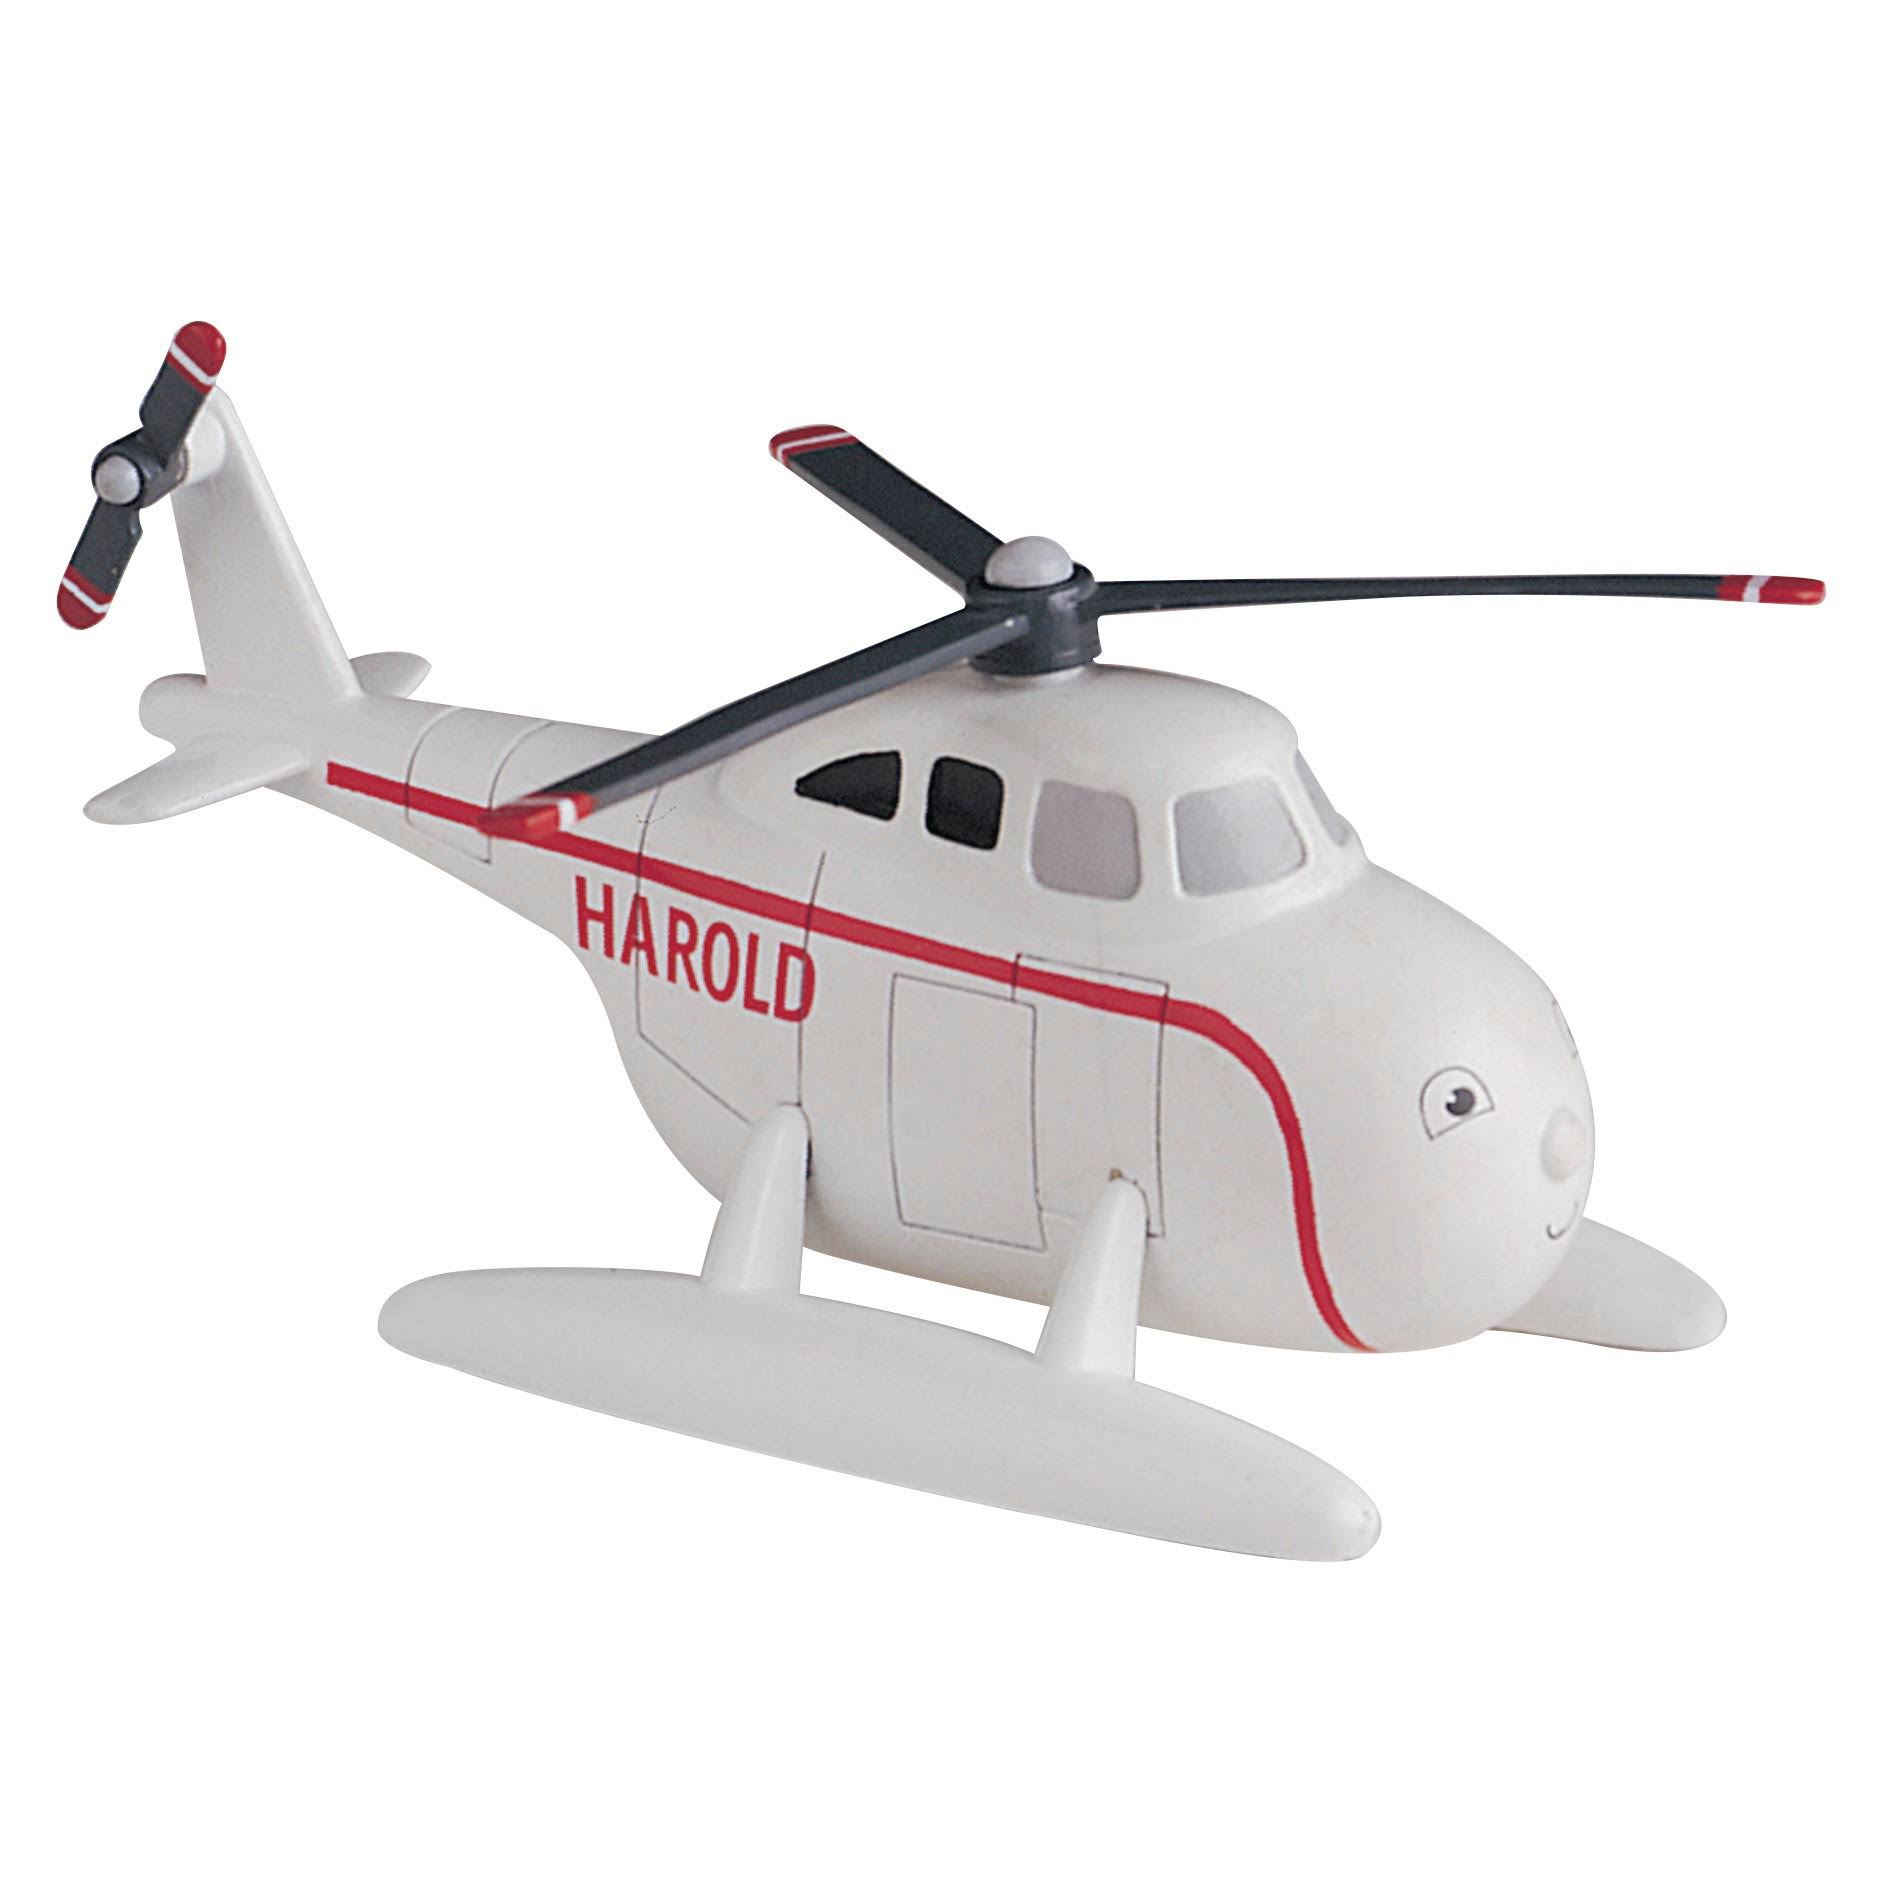 Bachmann Trains Thomas and Friends Figure - Harold the Helicopter, 1:76 Scale